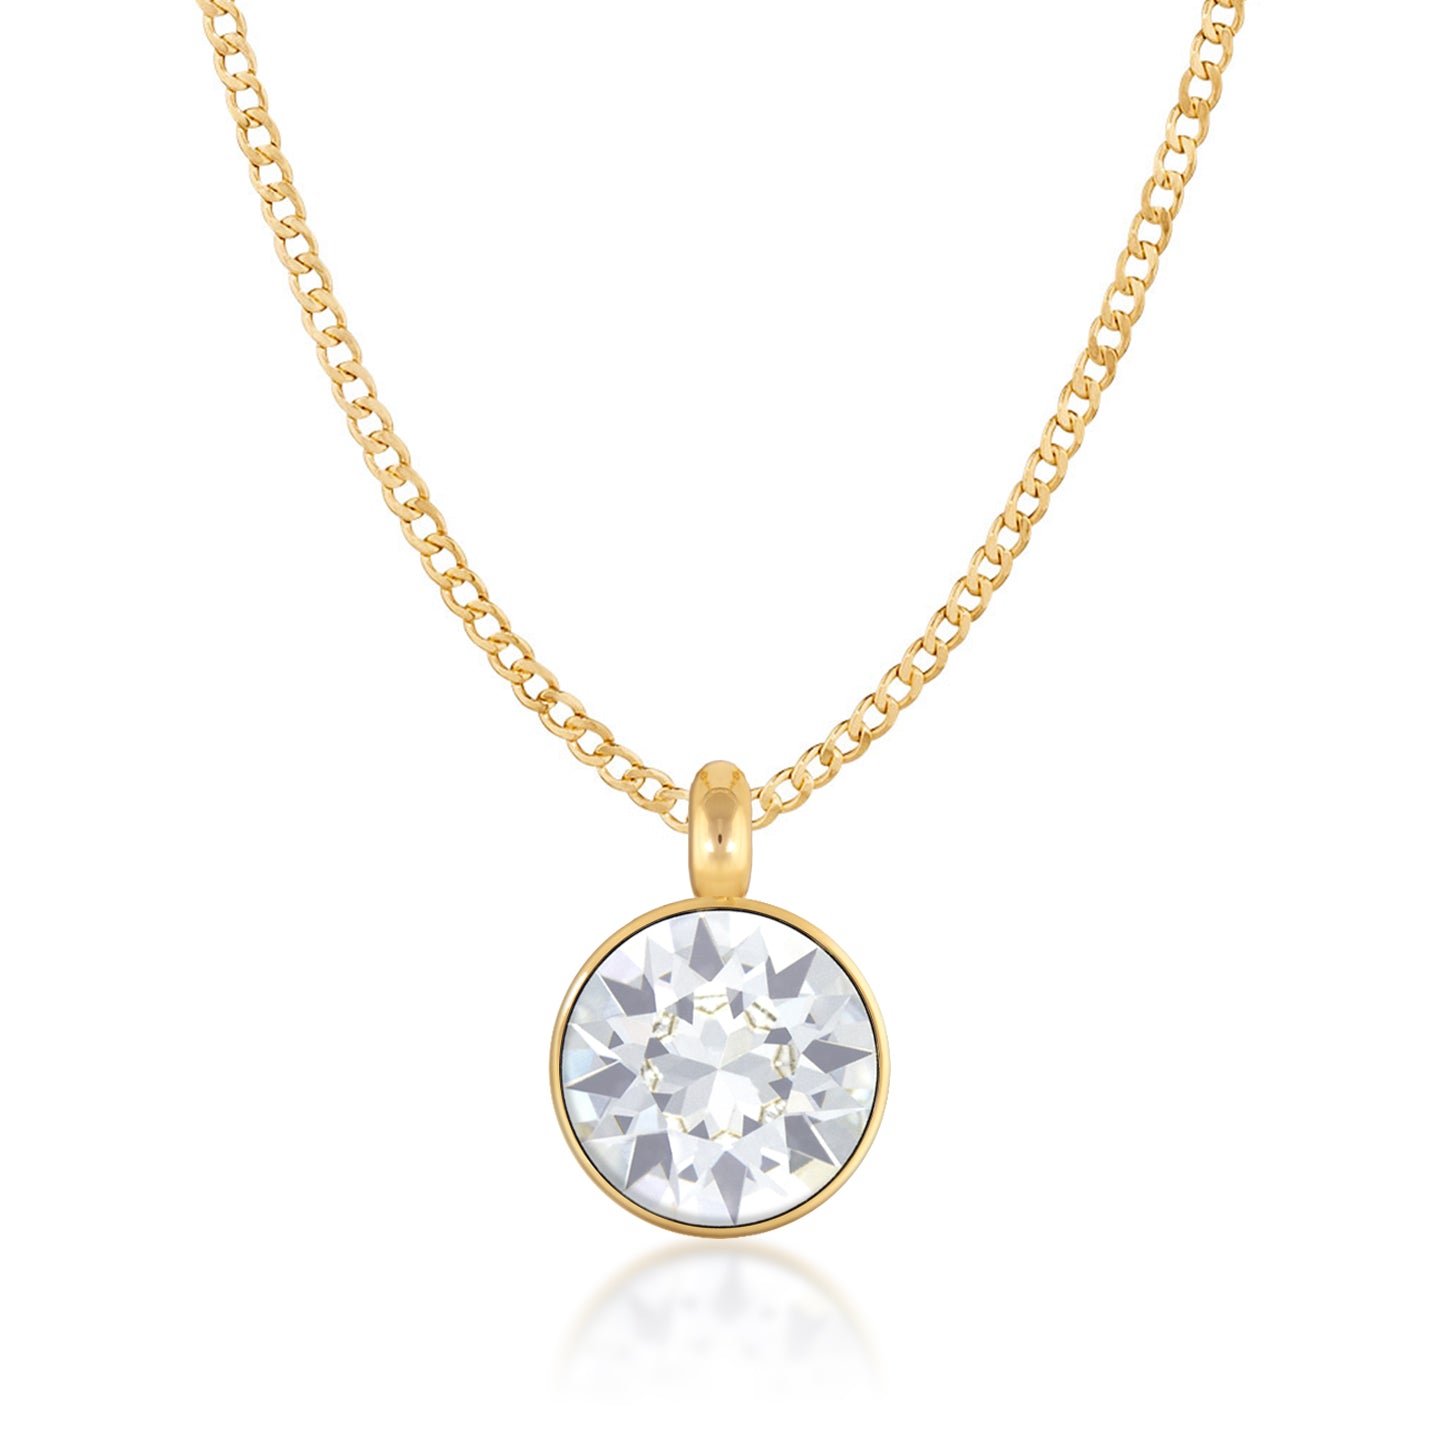 Bella Pendant Necklace with White Clear Round Crystals from Swarovski Gold Plated - Ed Heart